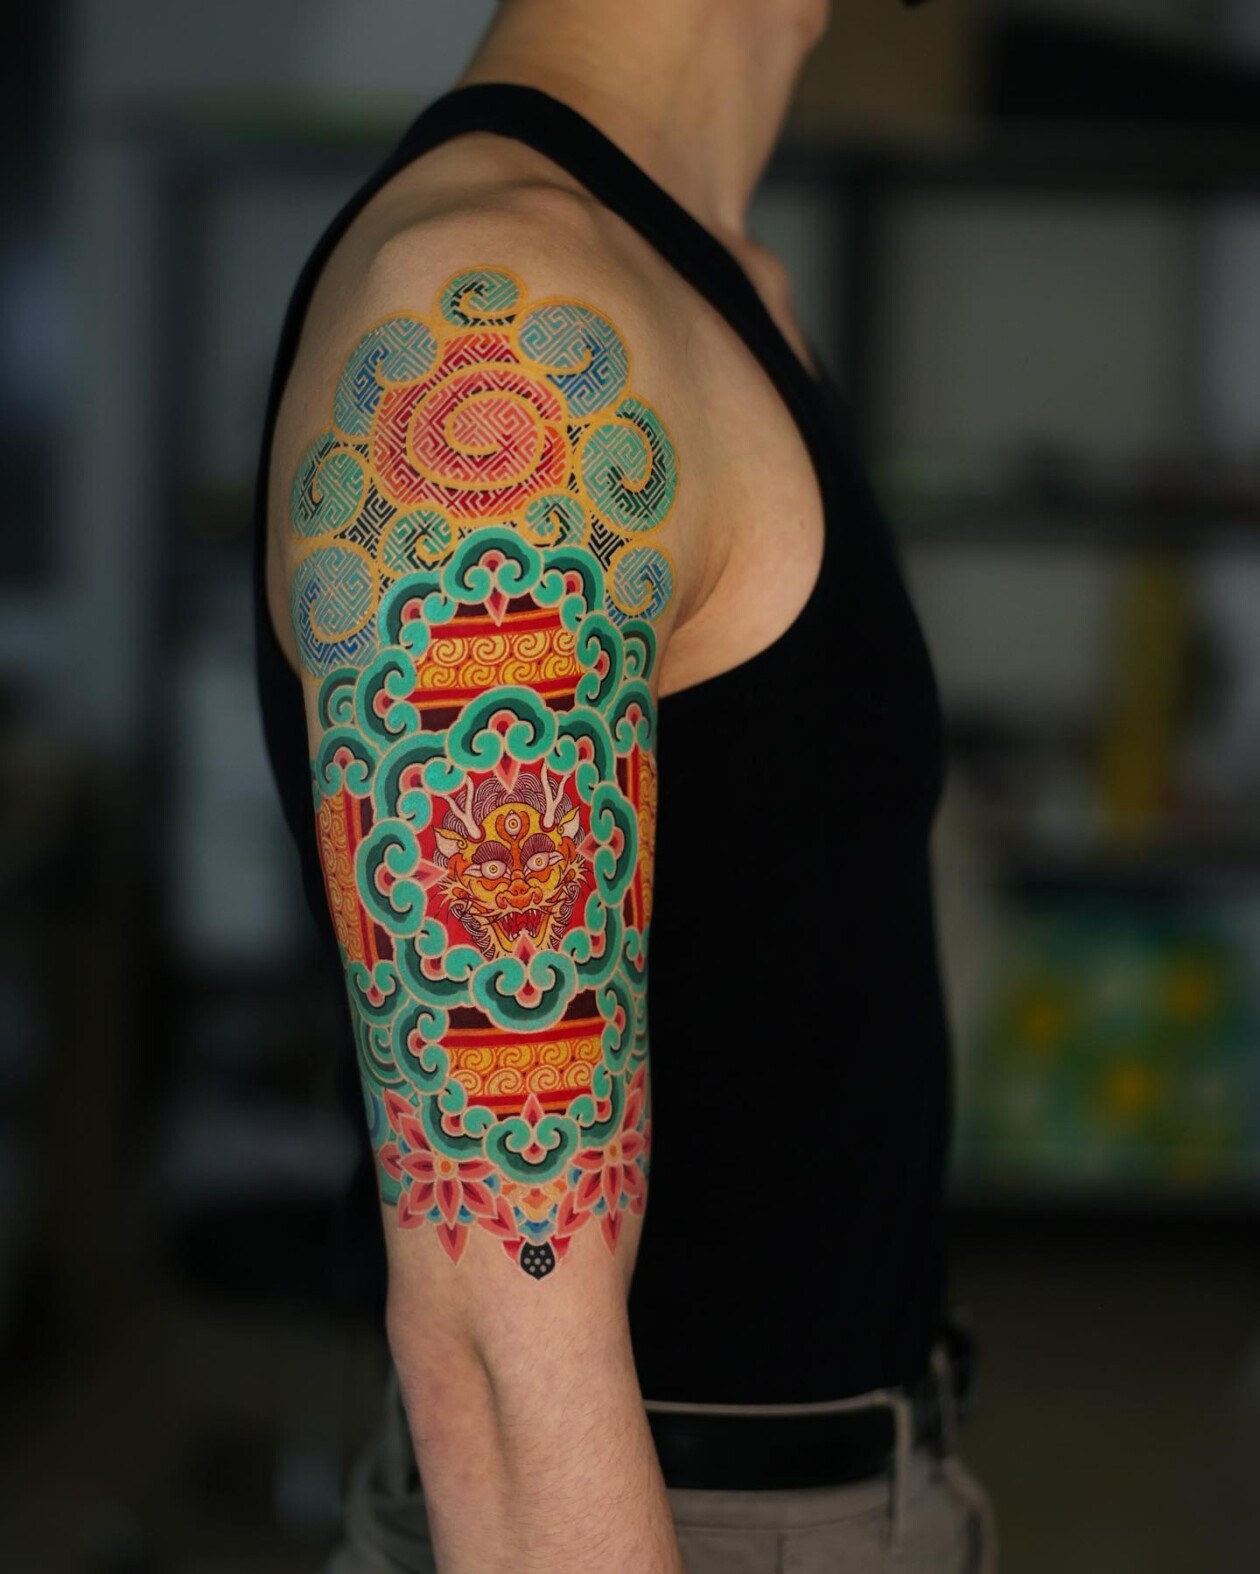 Vibrant Tattoos With Densely Layered Patterns By Korean Artist Pittakkm (3)